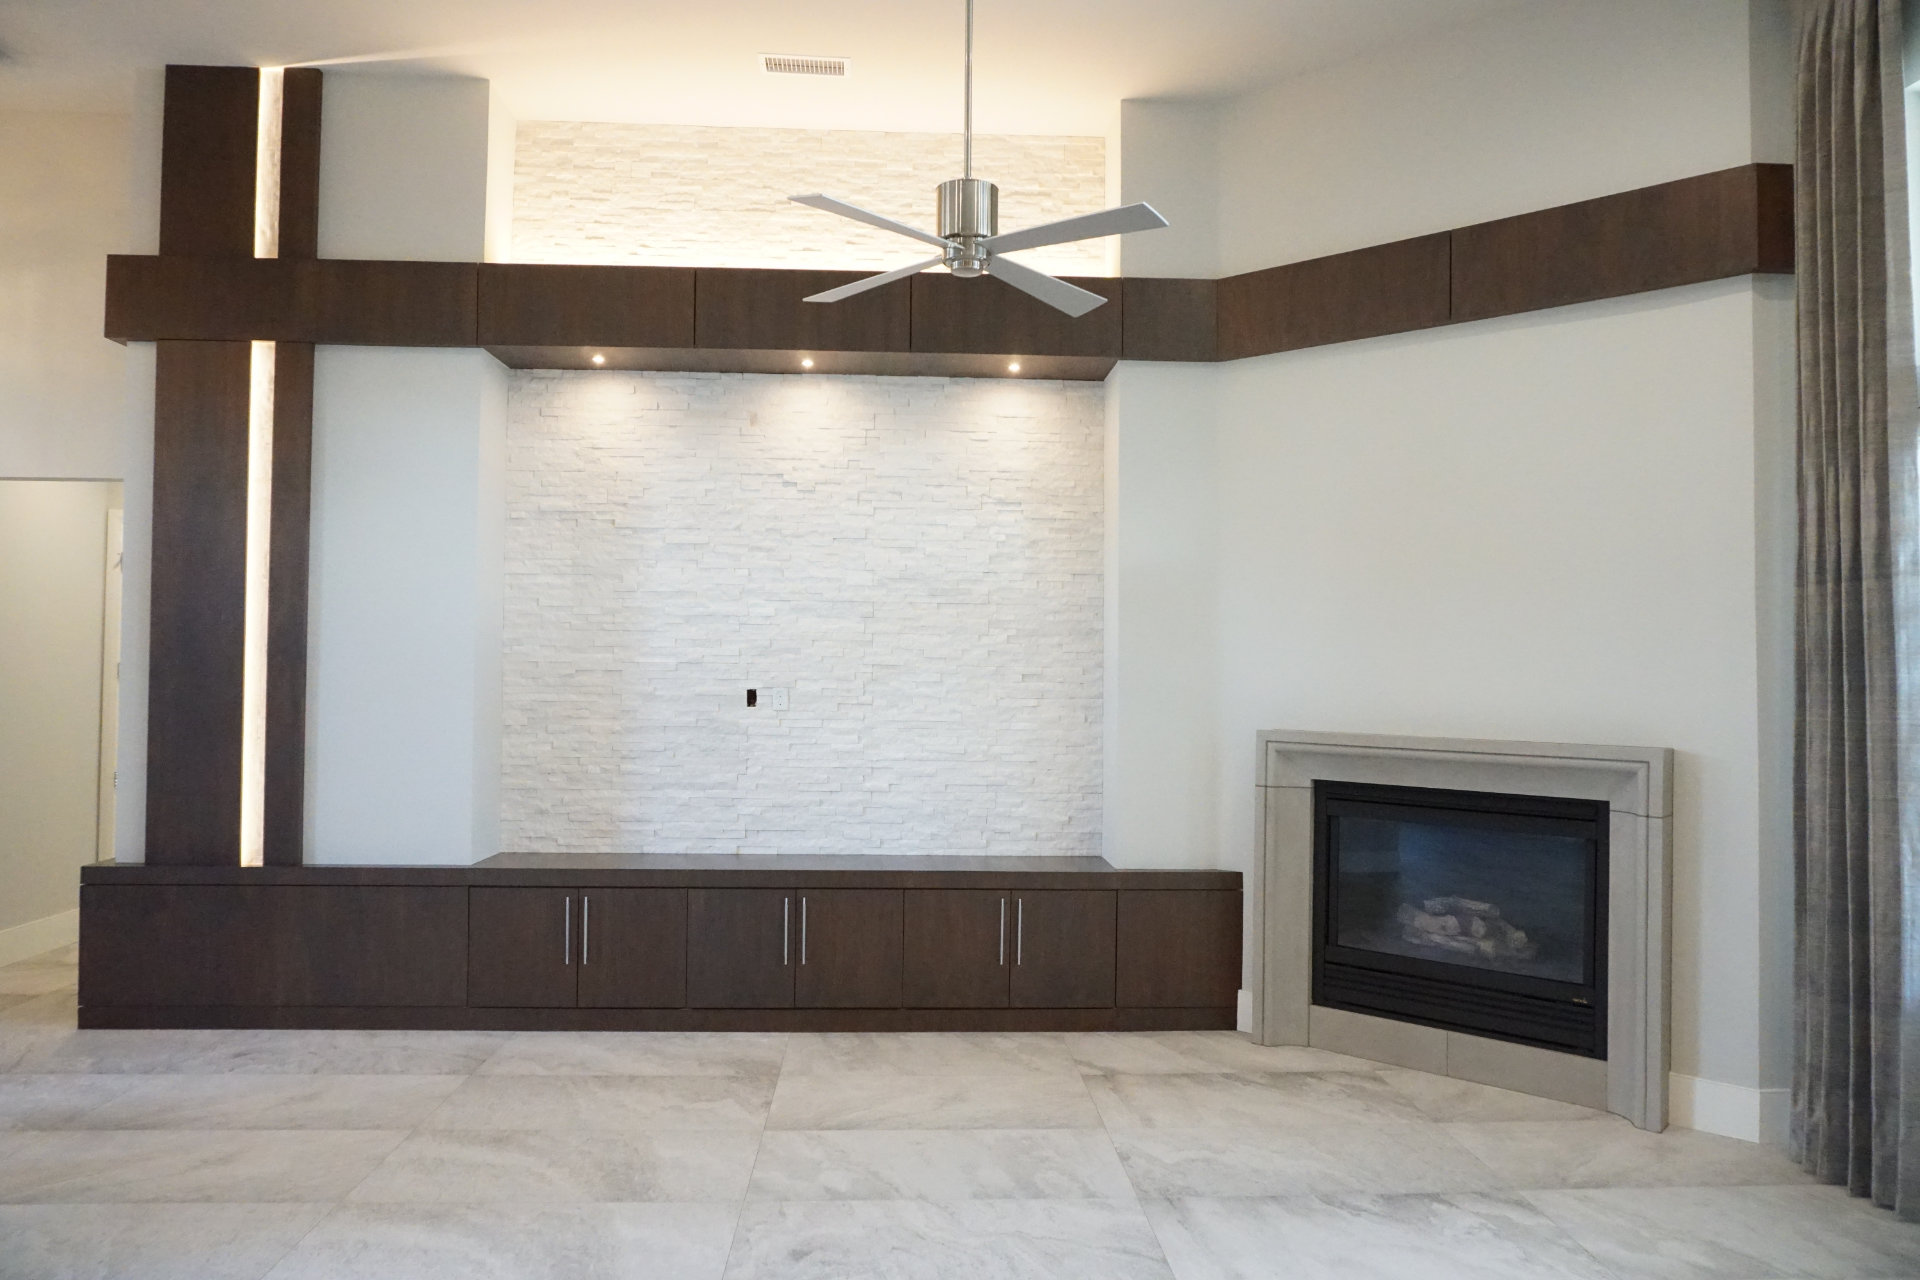 Unfurnished living room with fireplace and ceiling fan